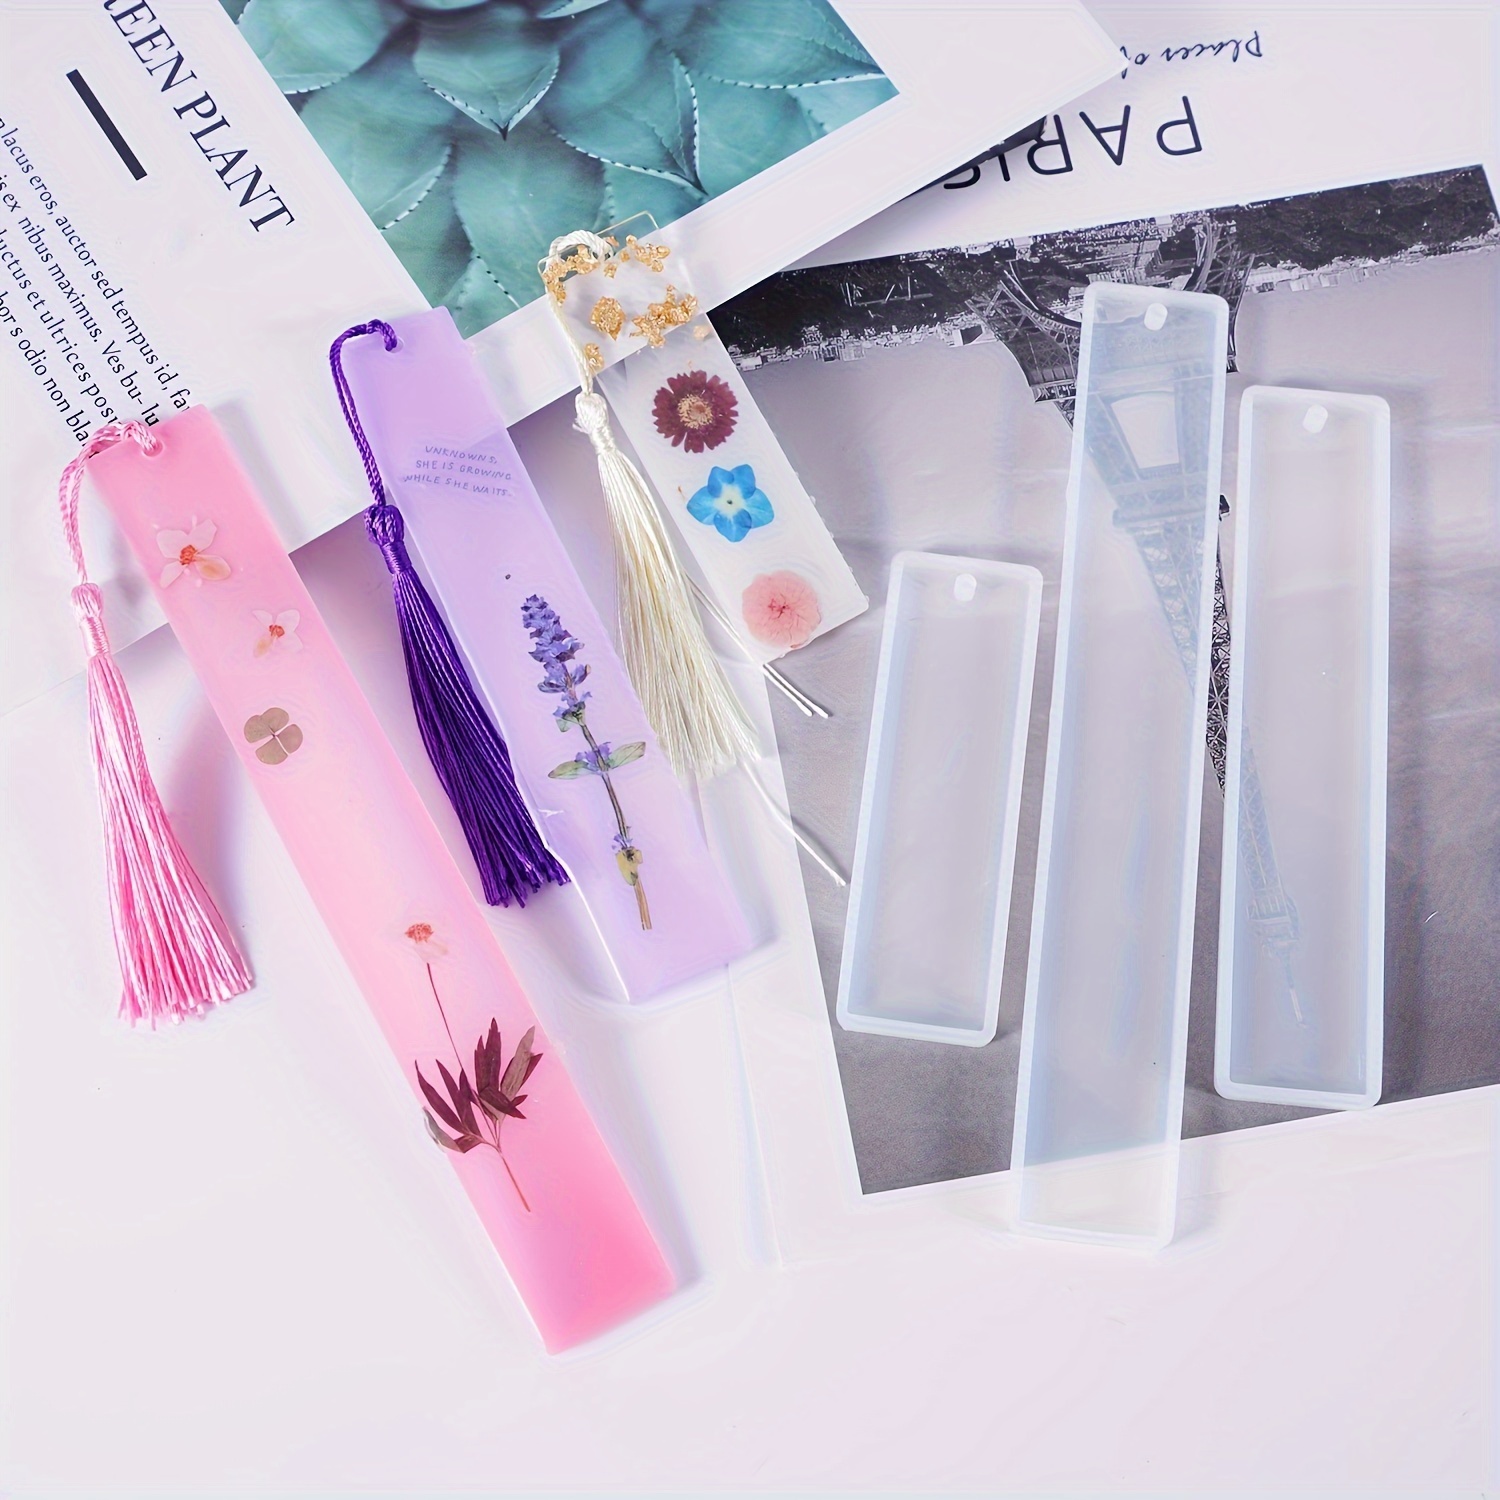 Rectangle Silicone Bookmark Mold DIY Handmade Bookmarks Mould Making Epoxy  Resin Jewelry Mold Tools Craft Supplies 3 Size4426734 From Saod, $1.25